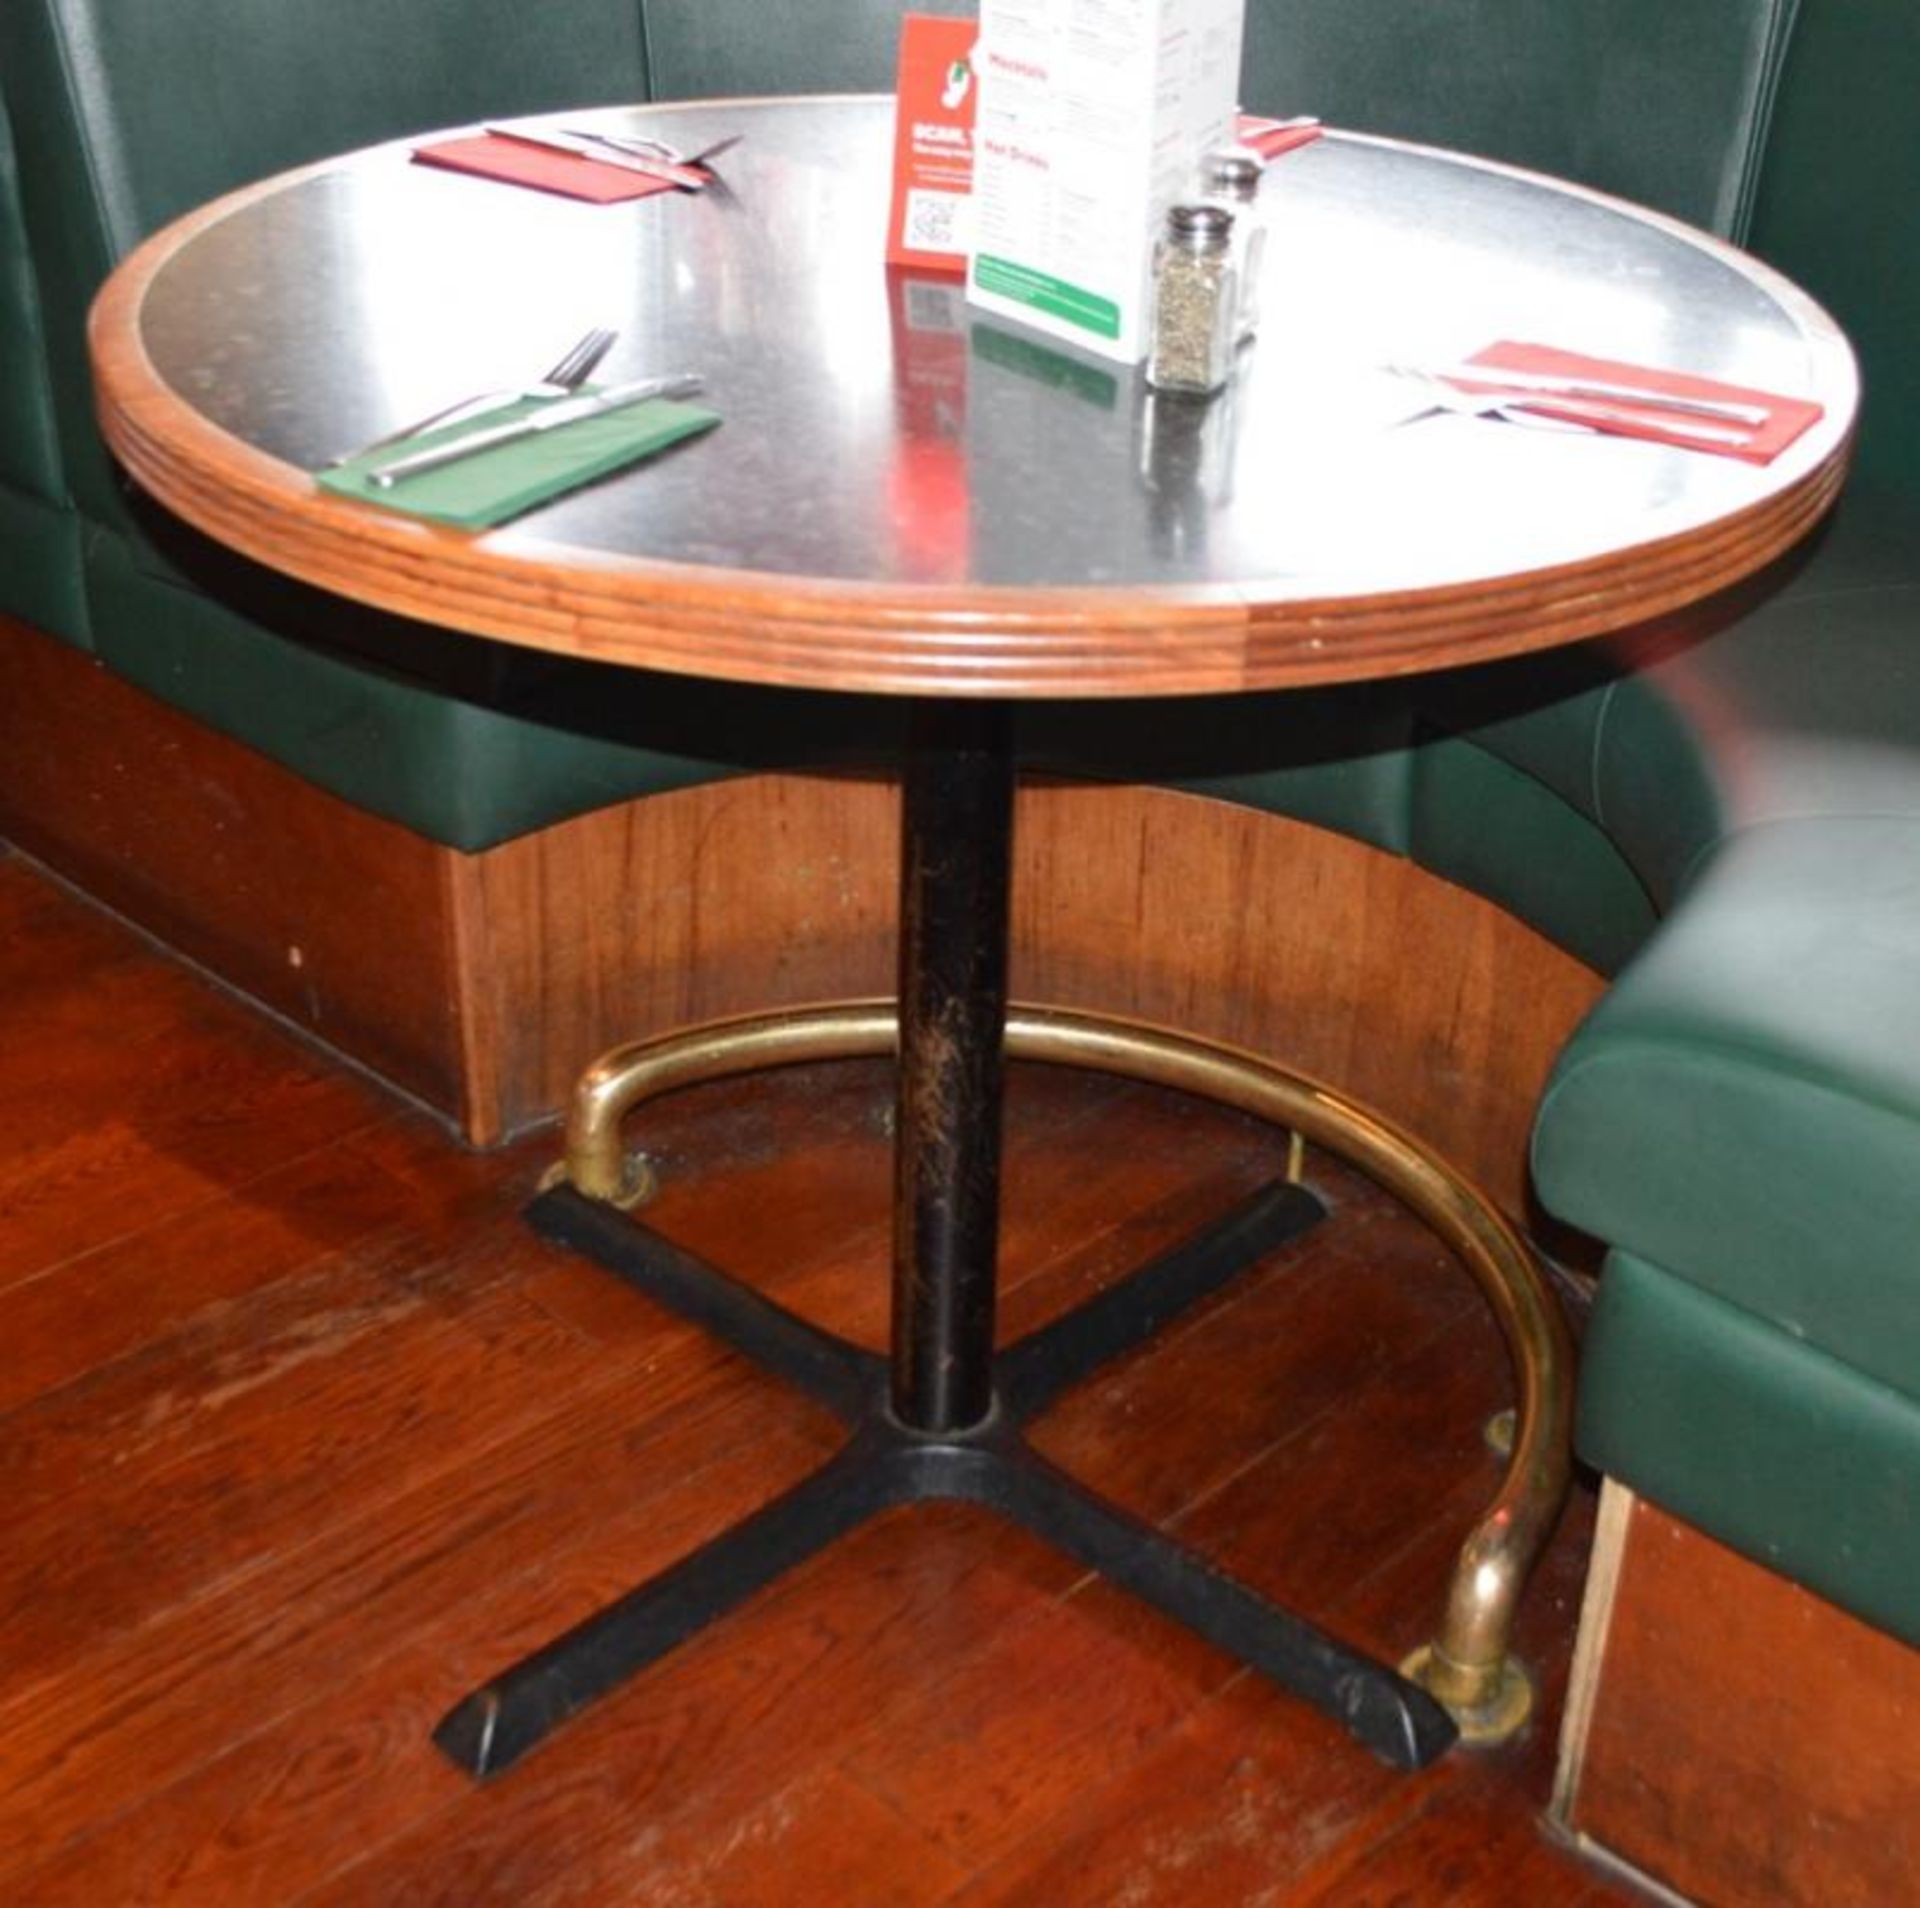 2 x Round Restaurant Dining Tables With Granite Effect Surface, Wooden Edging and Cast Iron Bases -